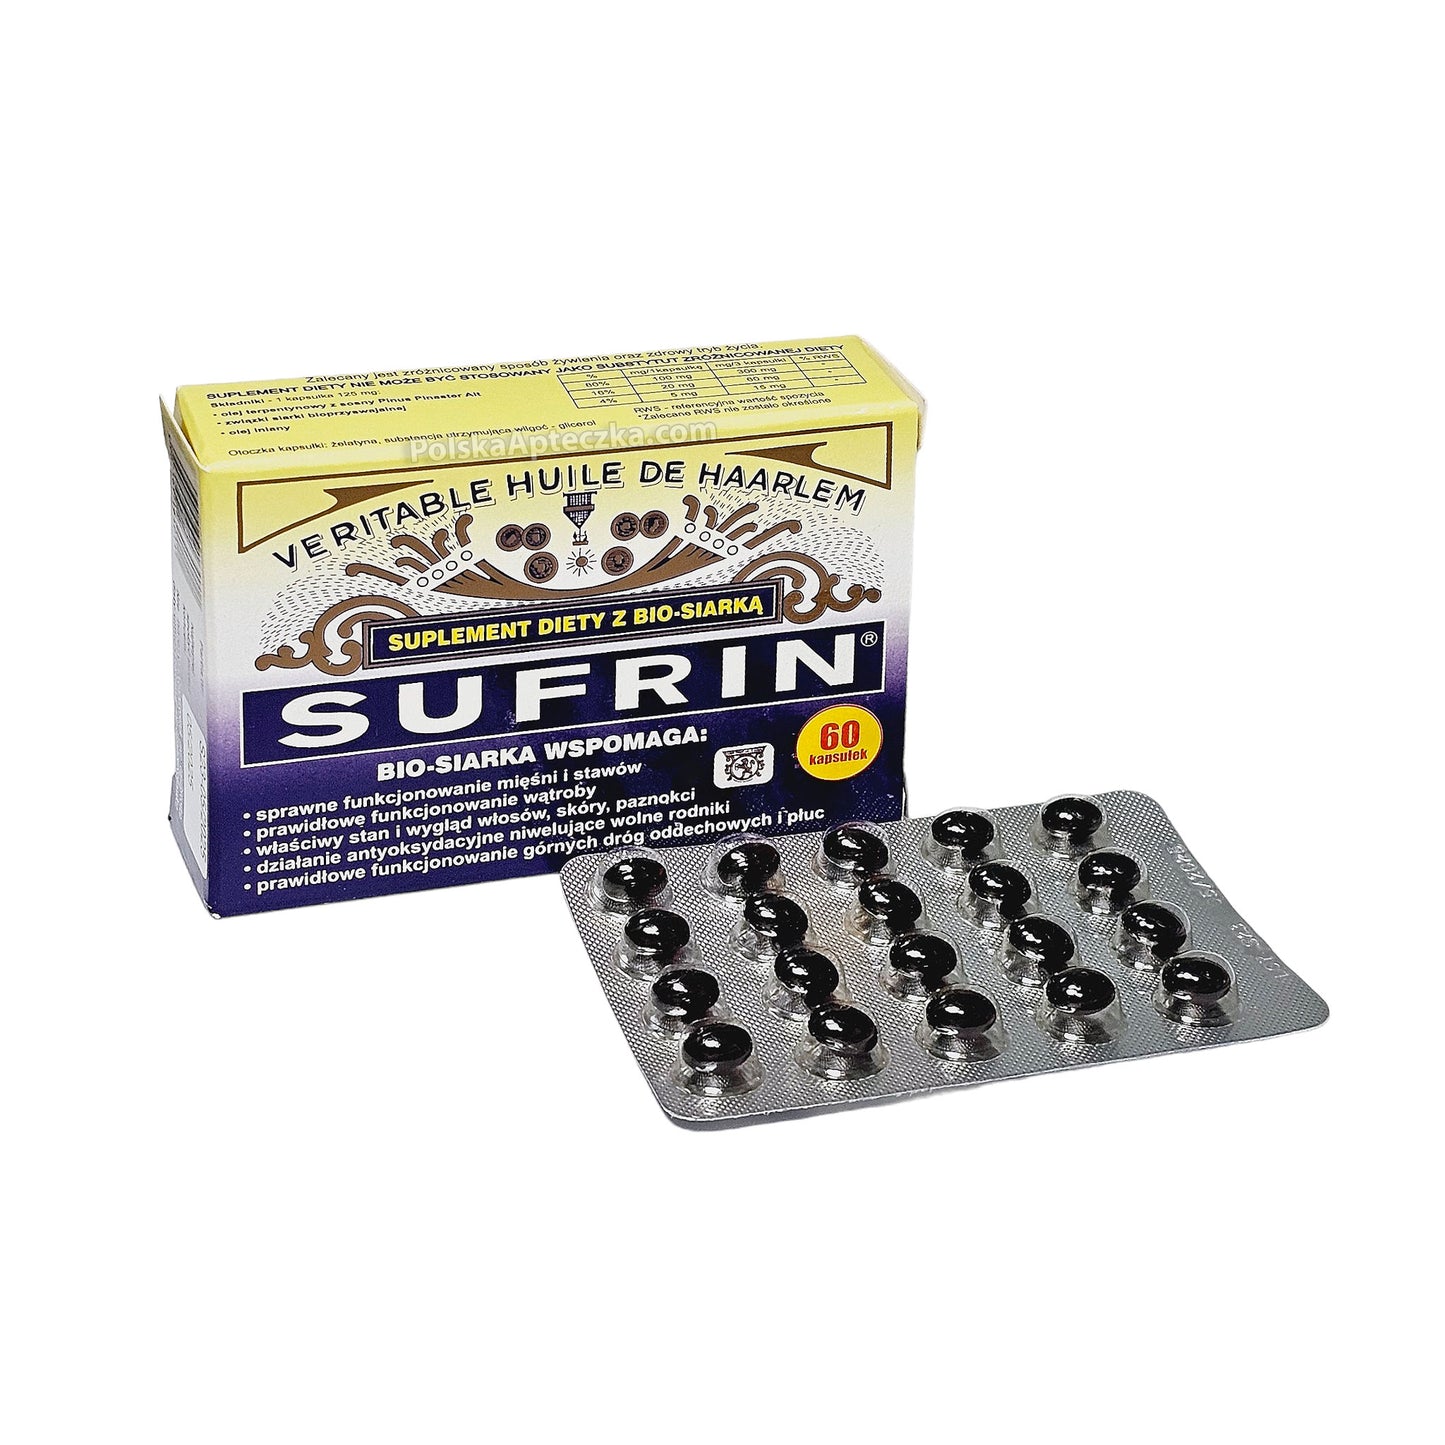 Sufrin tablets